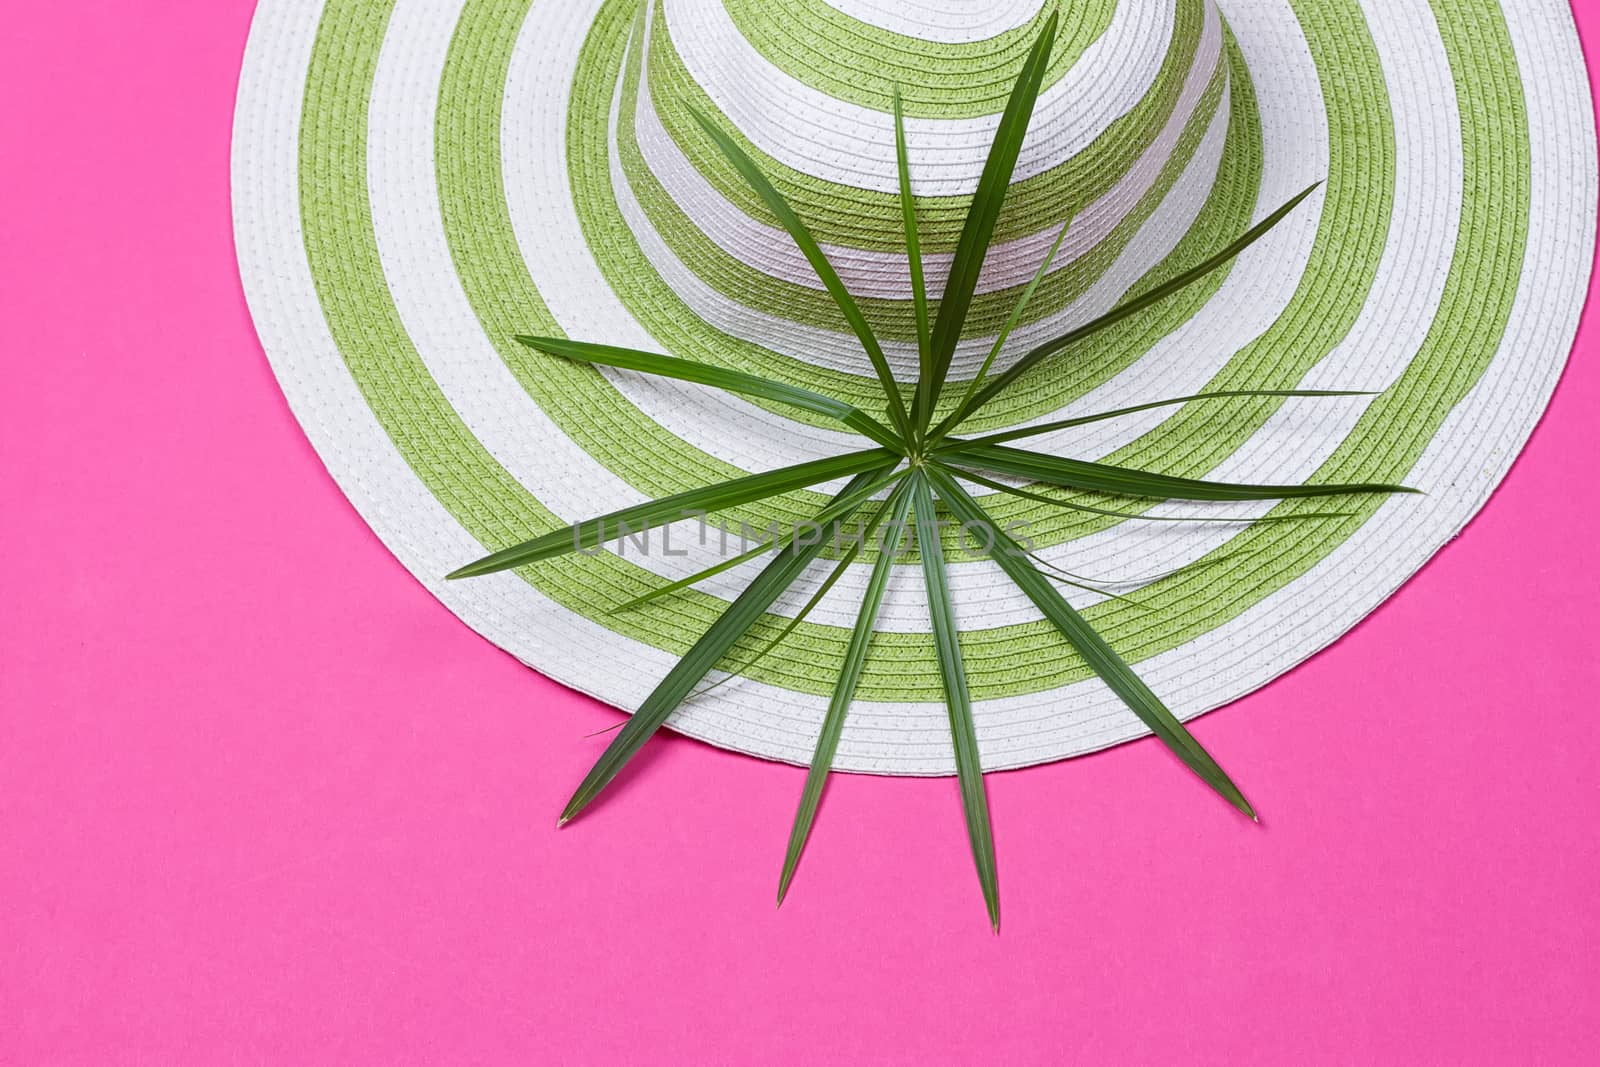 Beach hat and coconut leaves on pink background